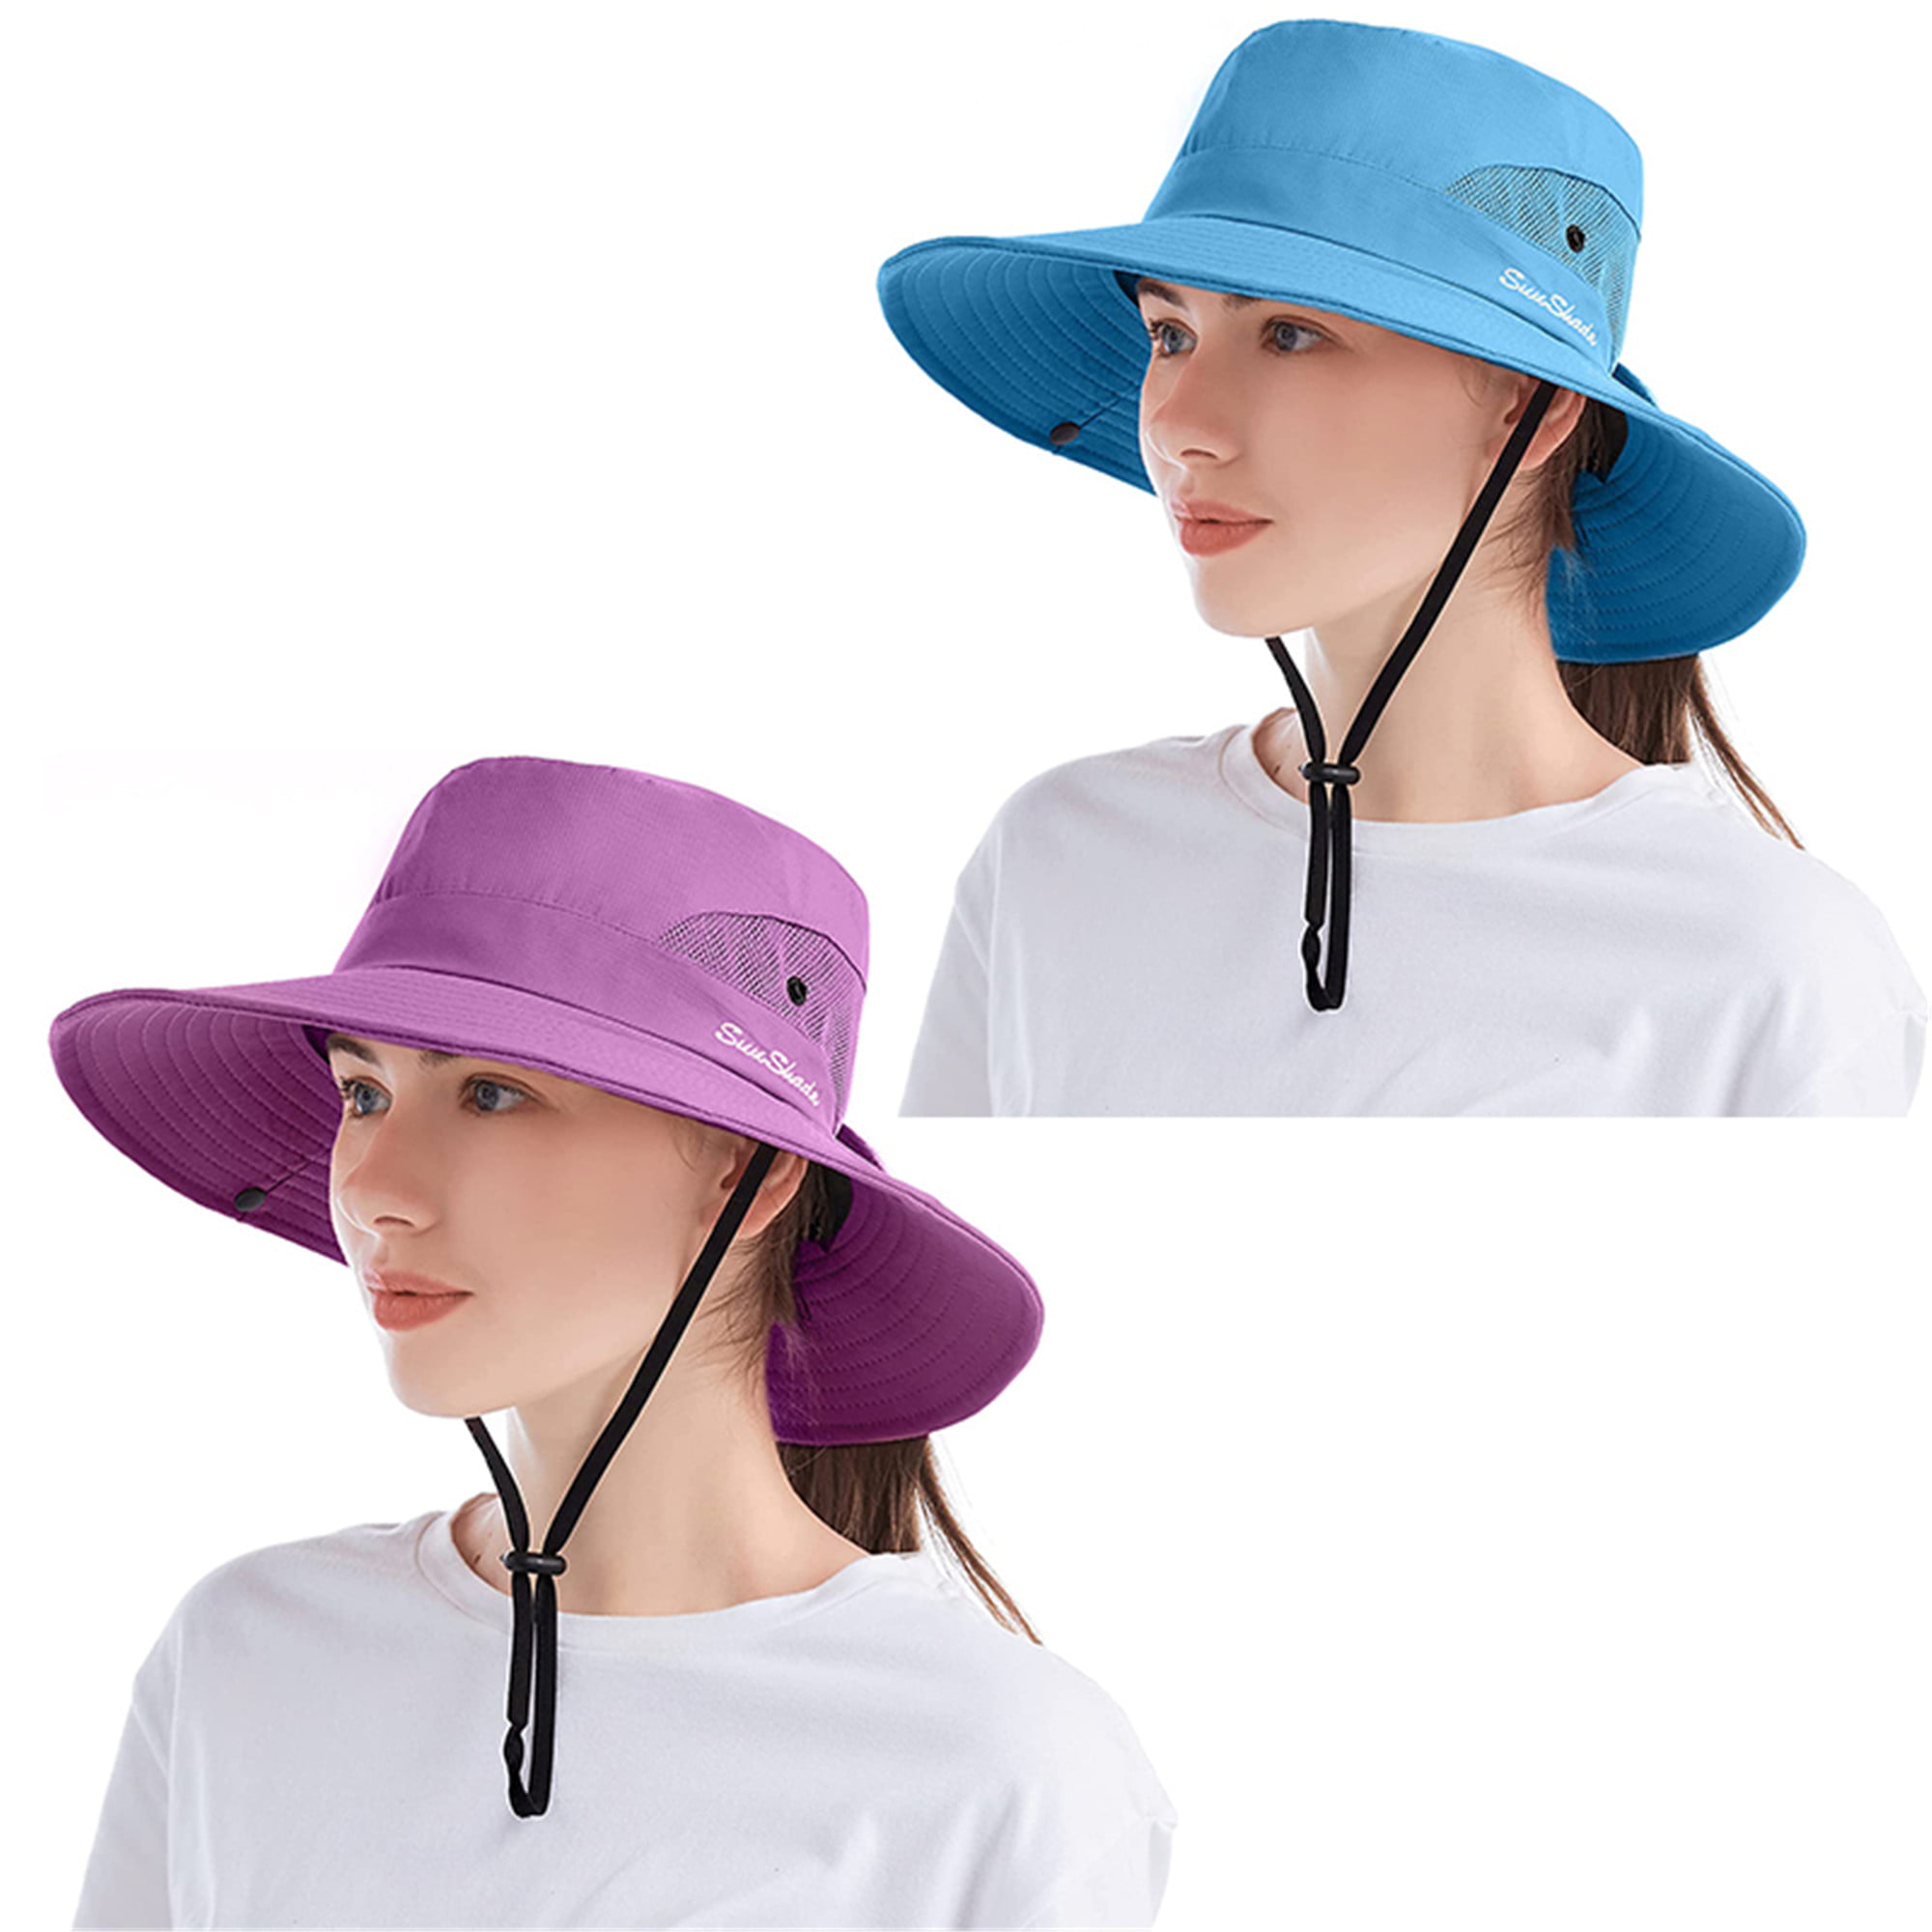 Elbourn 2 Pack Women's Outdoor UV-Protection-Foldable Sun-Hats